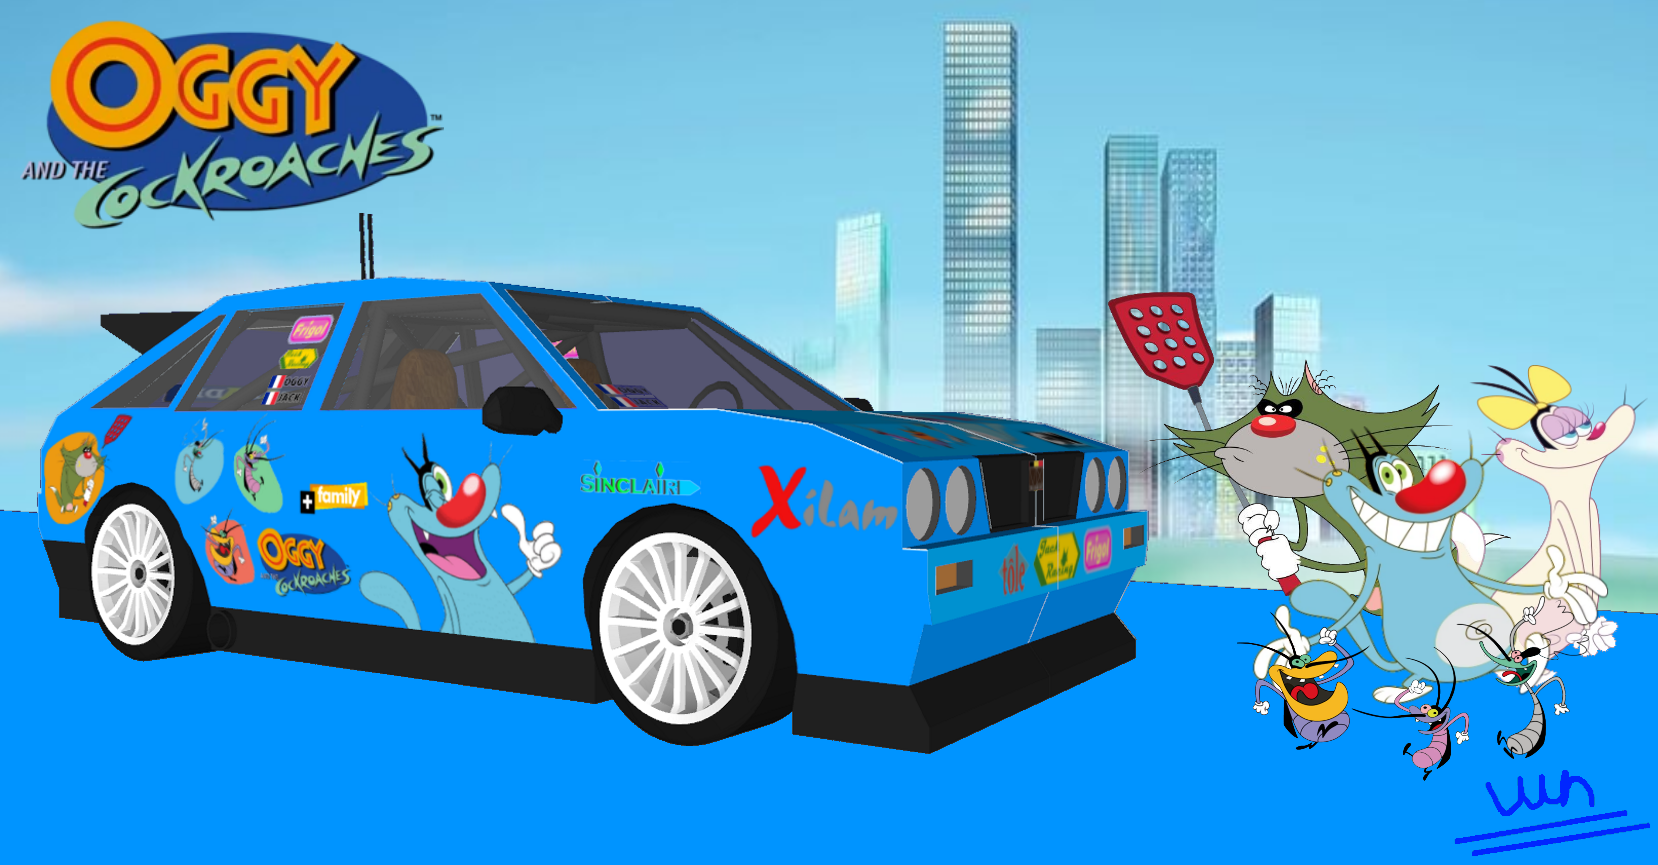 Oggy And The Cockroaches Theme Car Wallpaper by MarkHarrierT99 on DeviantArt